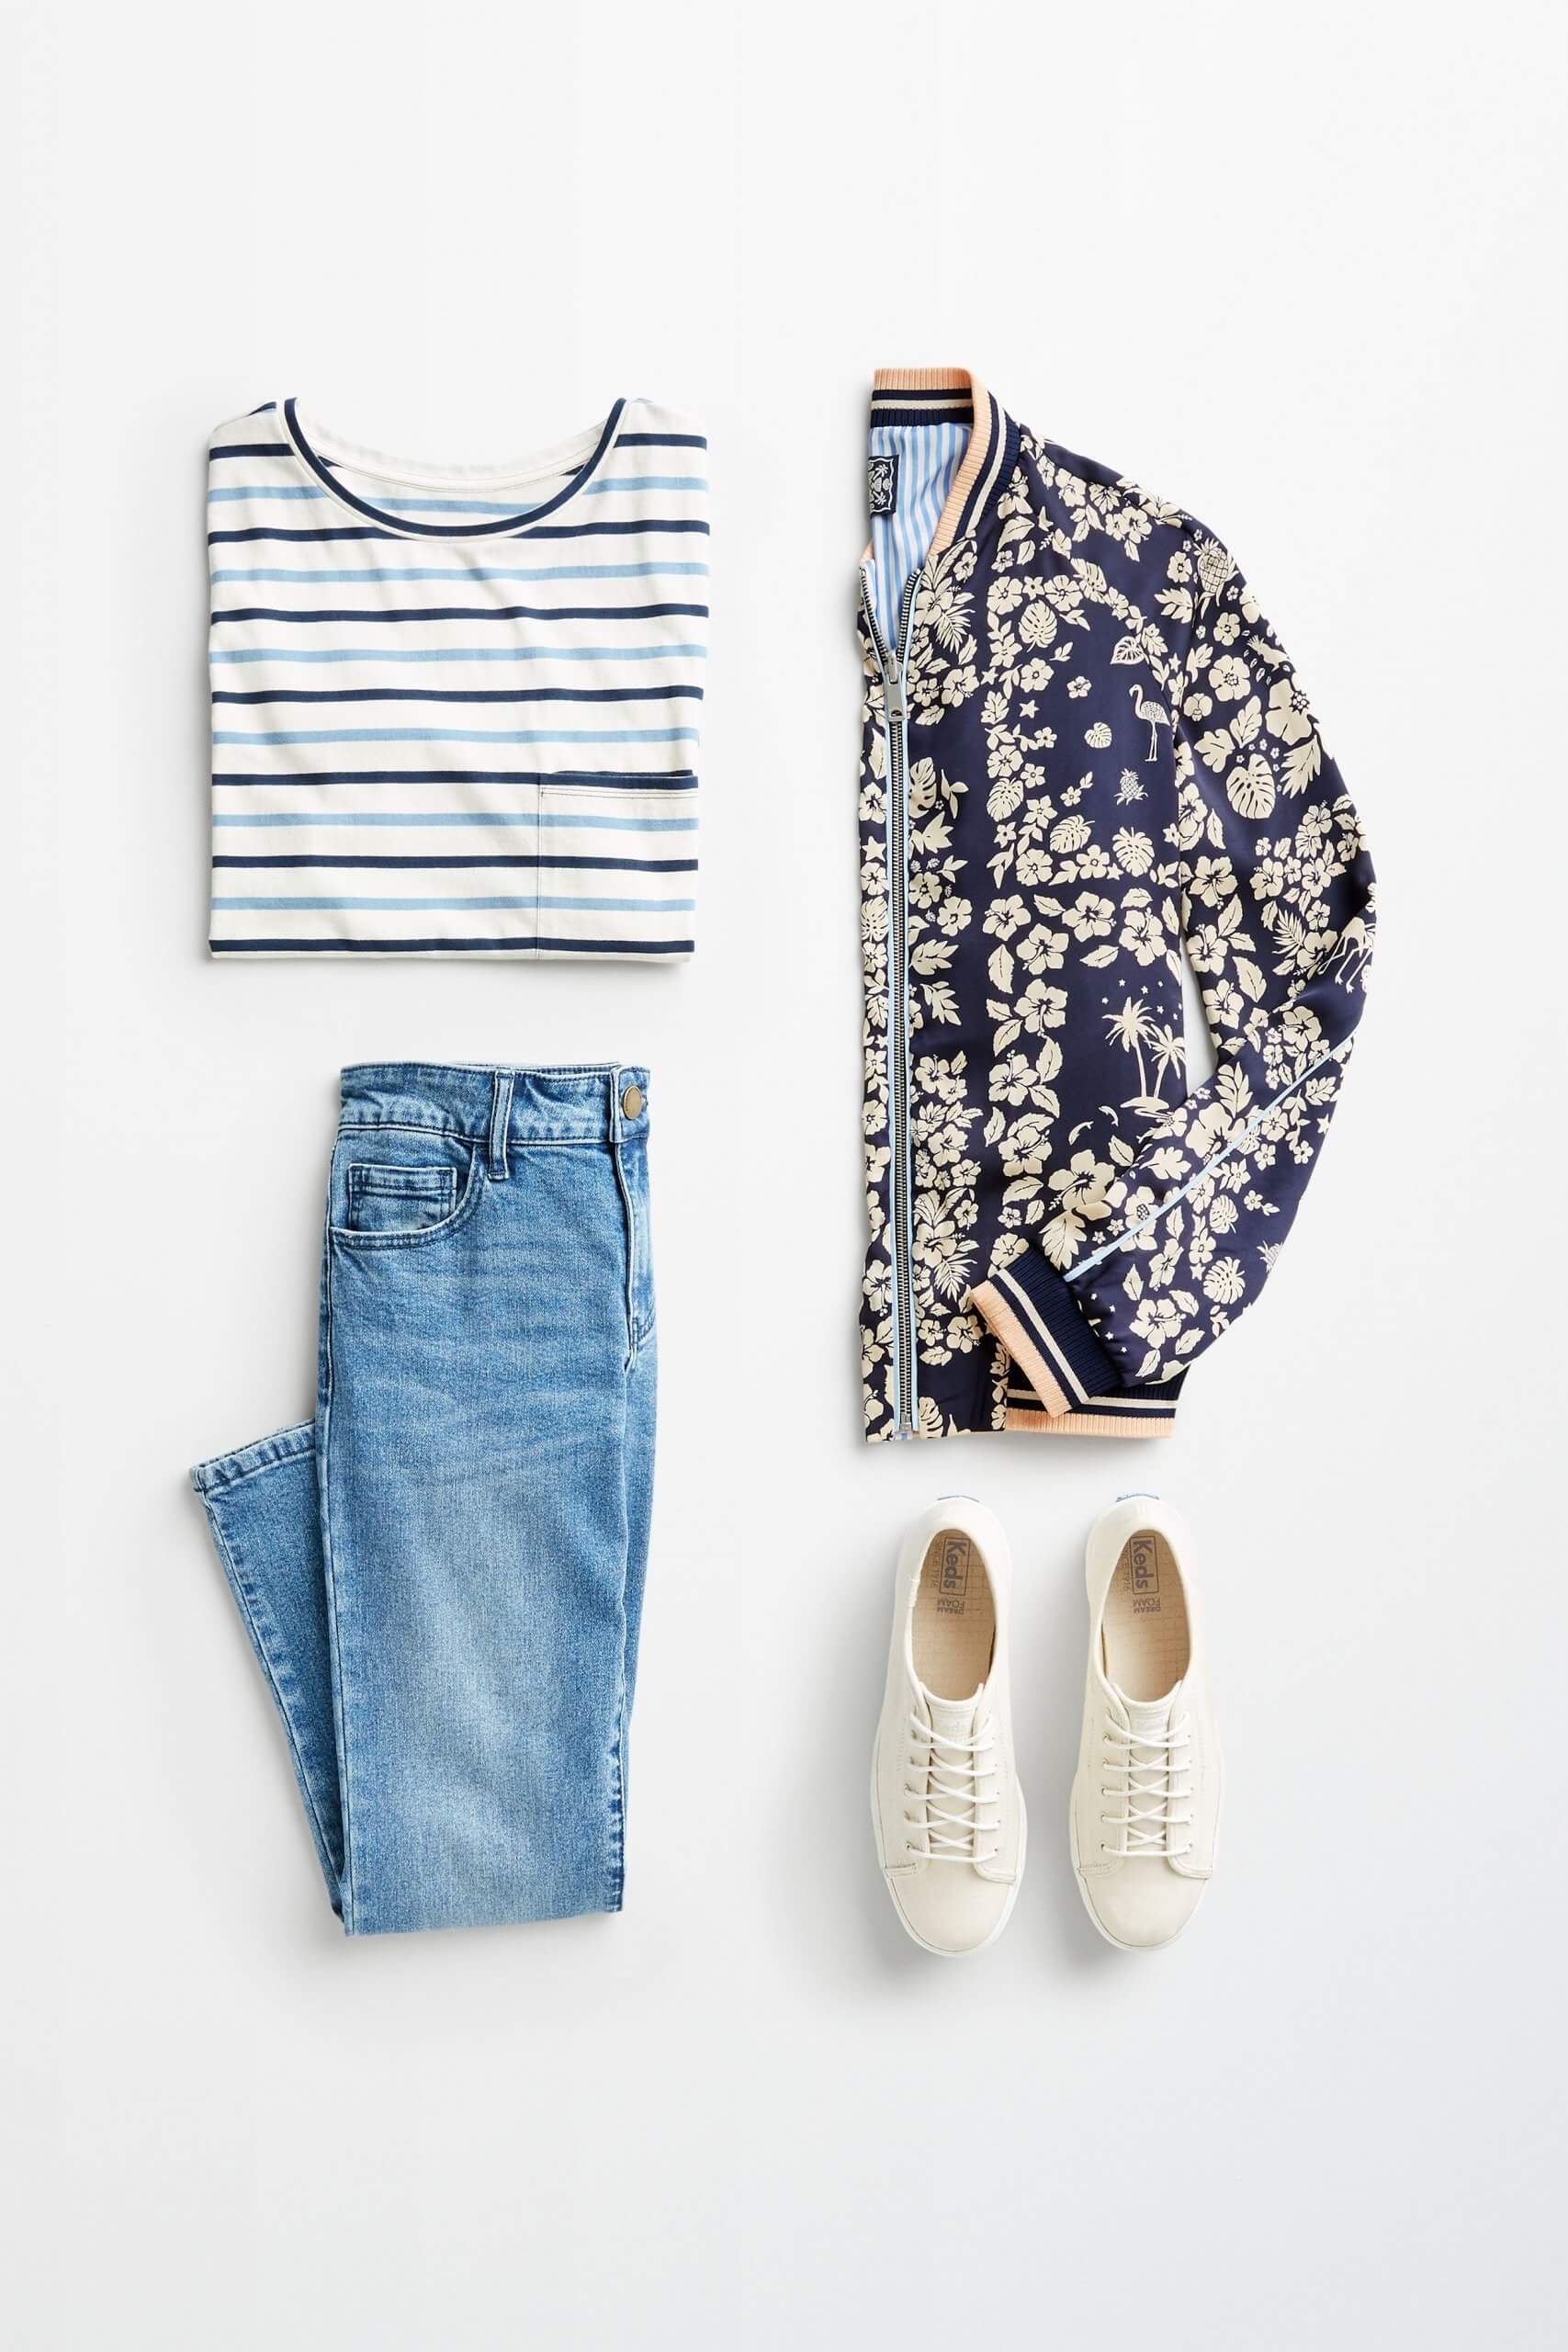 Stitch Fix women’s outfit laydown showing how to mix prints and patterns featuring a striped t-shirt, reversible bomber jacket, blue denim and off-white sneakers.